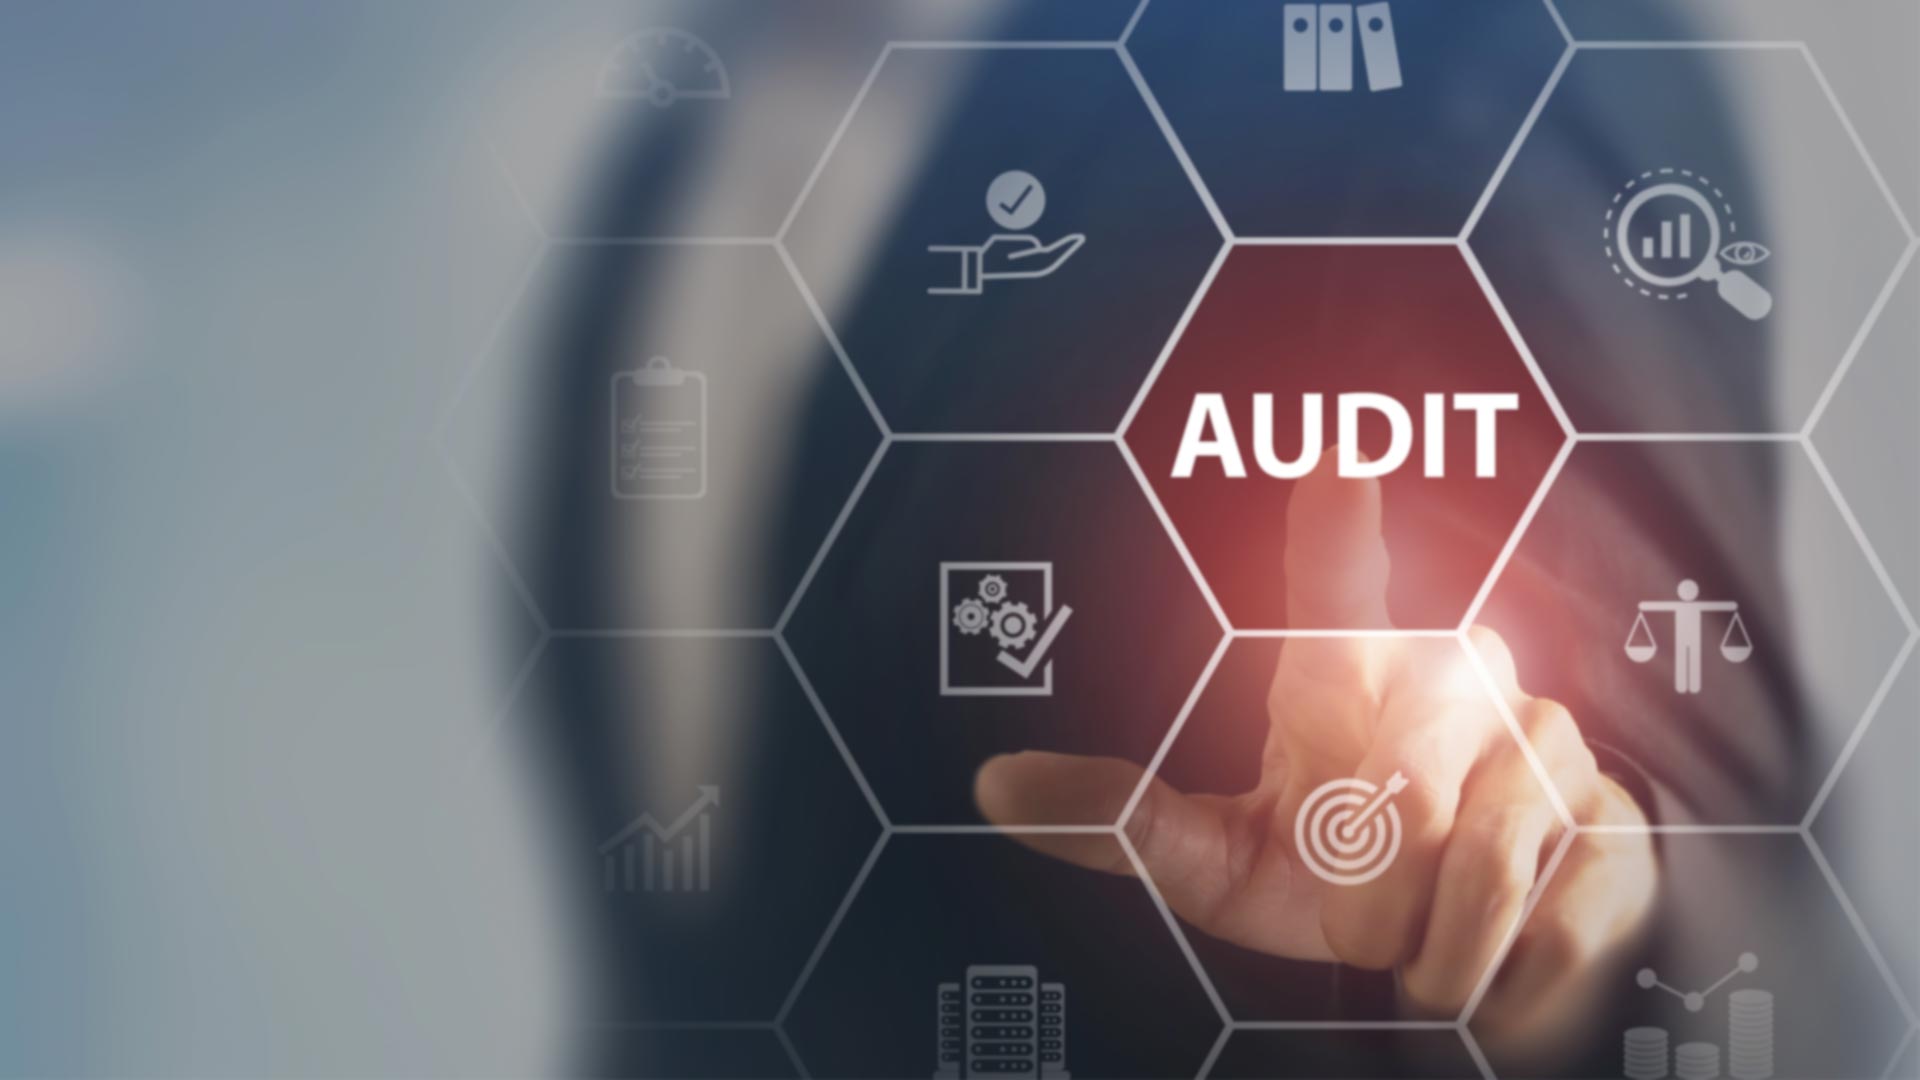 The Future of Audit